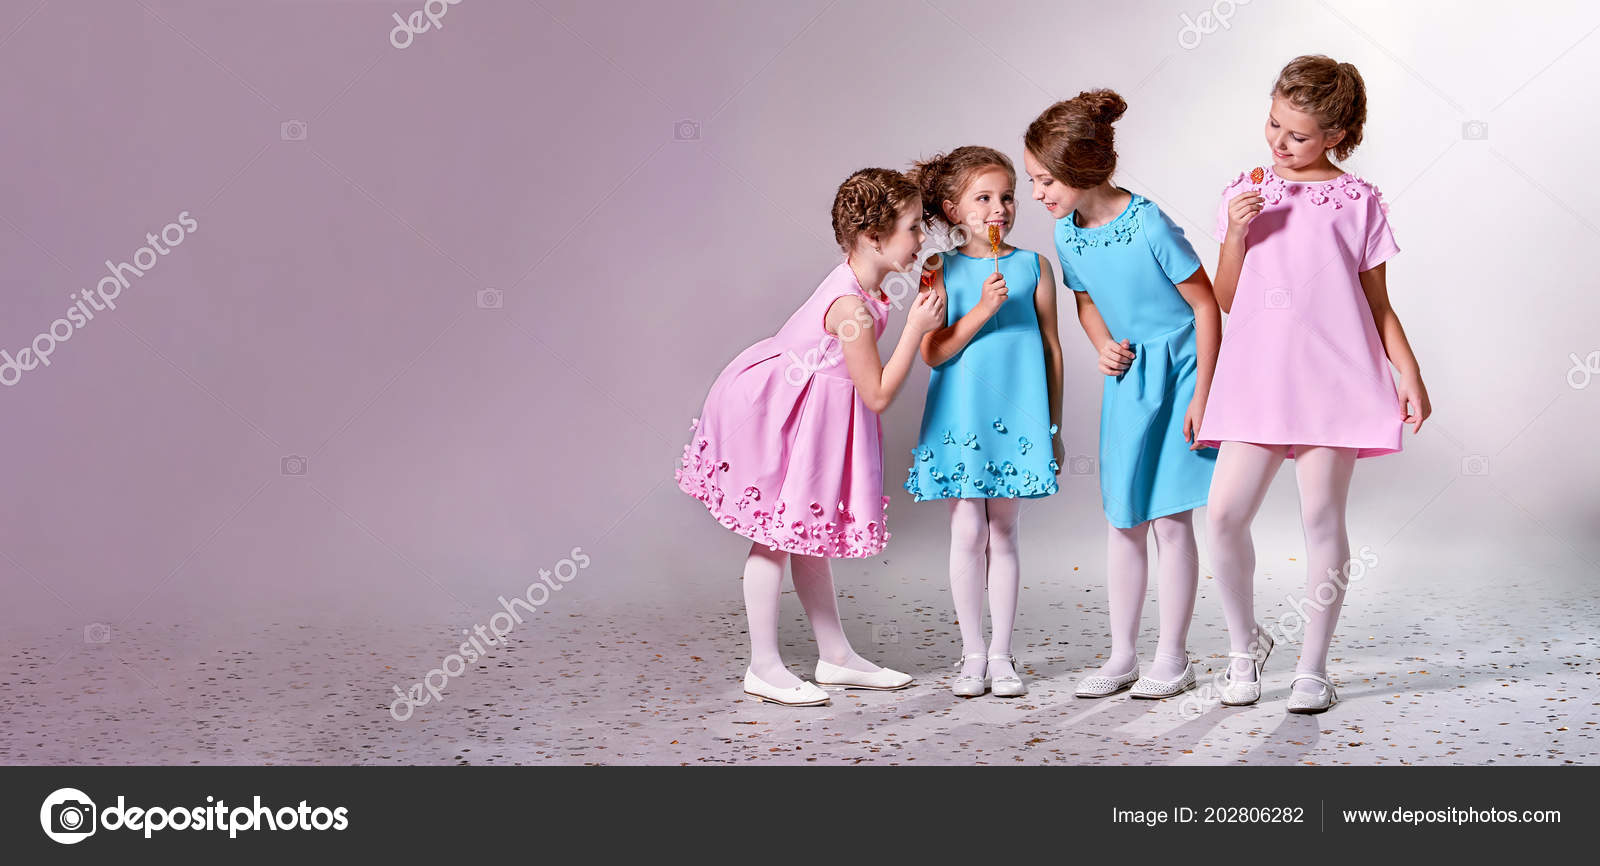 Group little girl in beautiful pink,blue  children advertise  clothes for clothing ,pastel background banner,copy space for  text,shop,advertising. Concept fashion models kids. Stock Photo by  ©Valendina 202806282